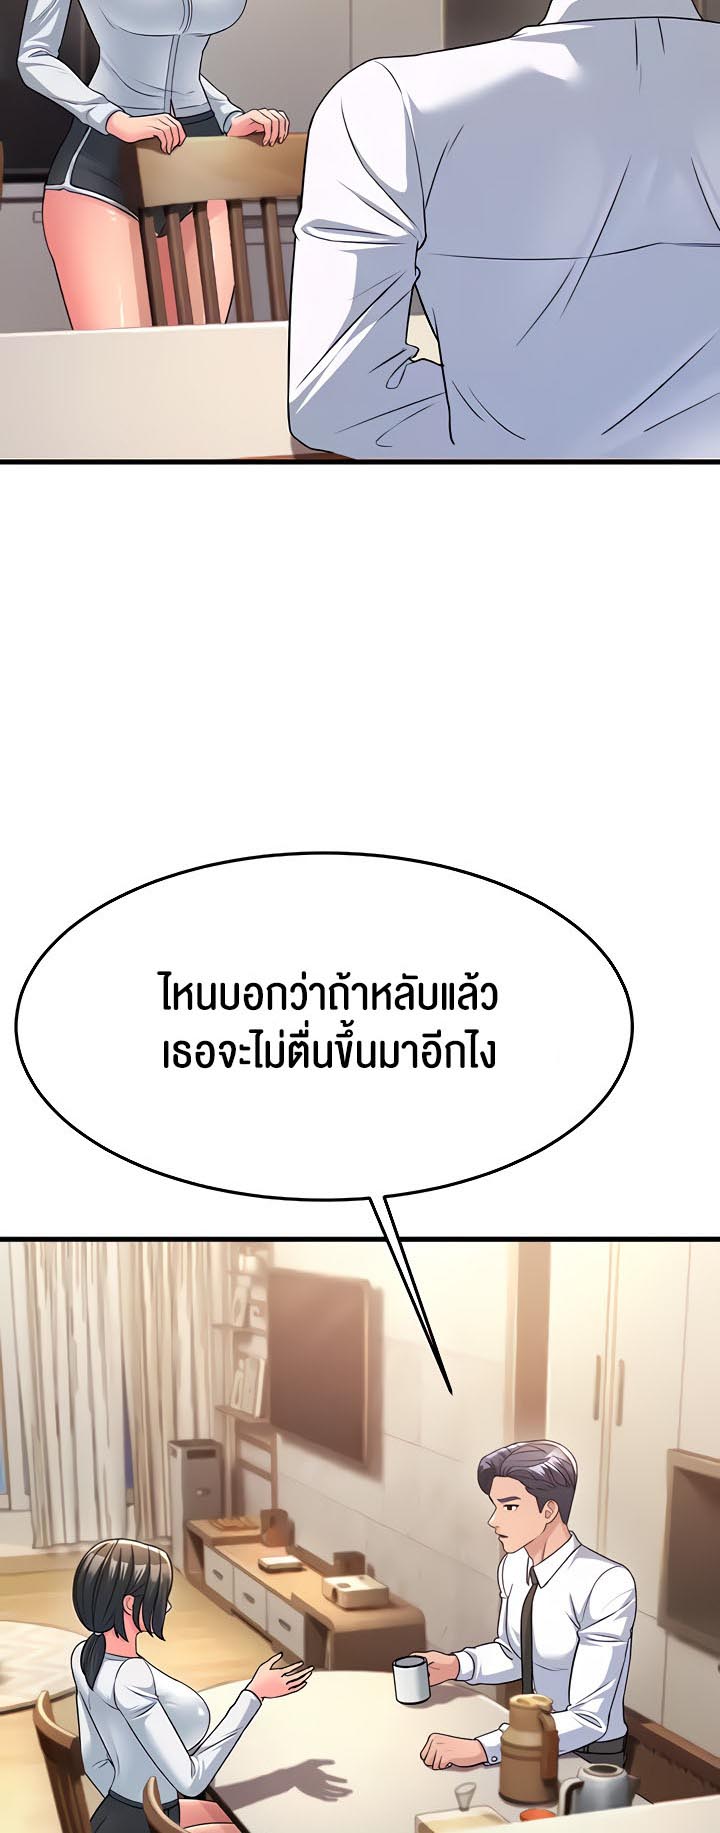 à¸­à¹ˆà¸²à¸™à¹‚à¸”à¸ˆà¸´à¸™ à¹€à¸£à¸·à¹ˆà¸­à¸‡ Mother in Law Bends To My Will 11 09